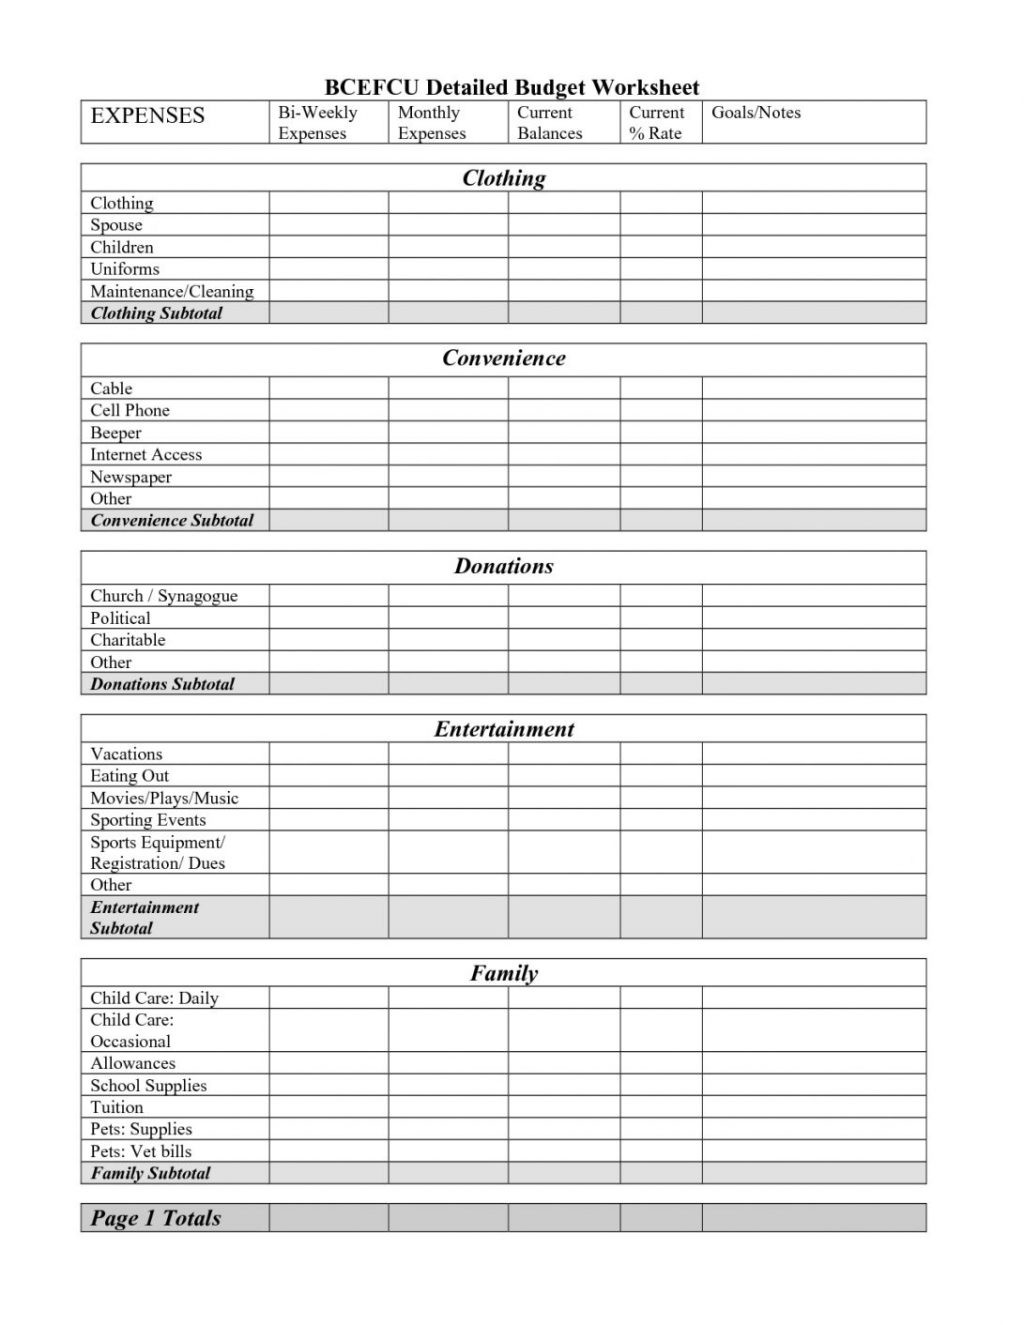 Home Daycare Tax Worksheet Spreadsheet Home Daycare Tax Worksheet Personal In E and